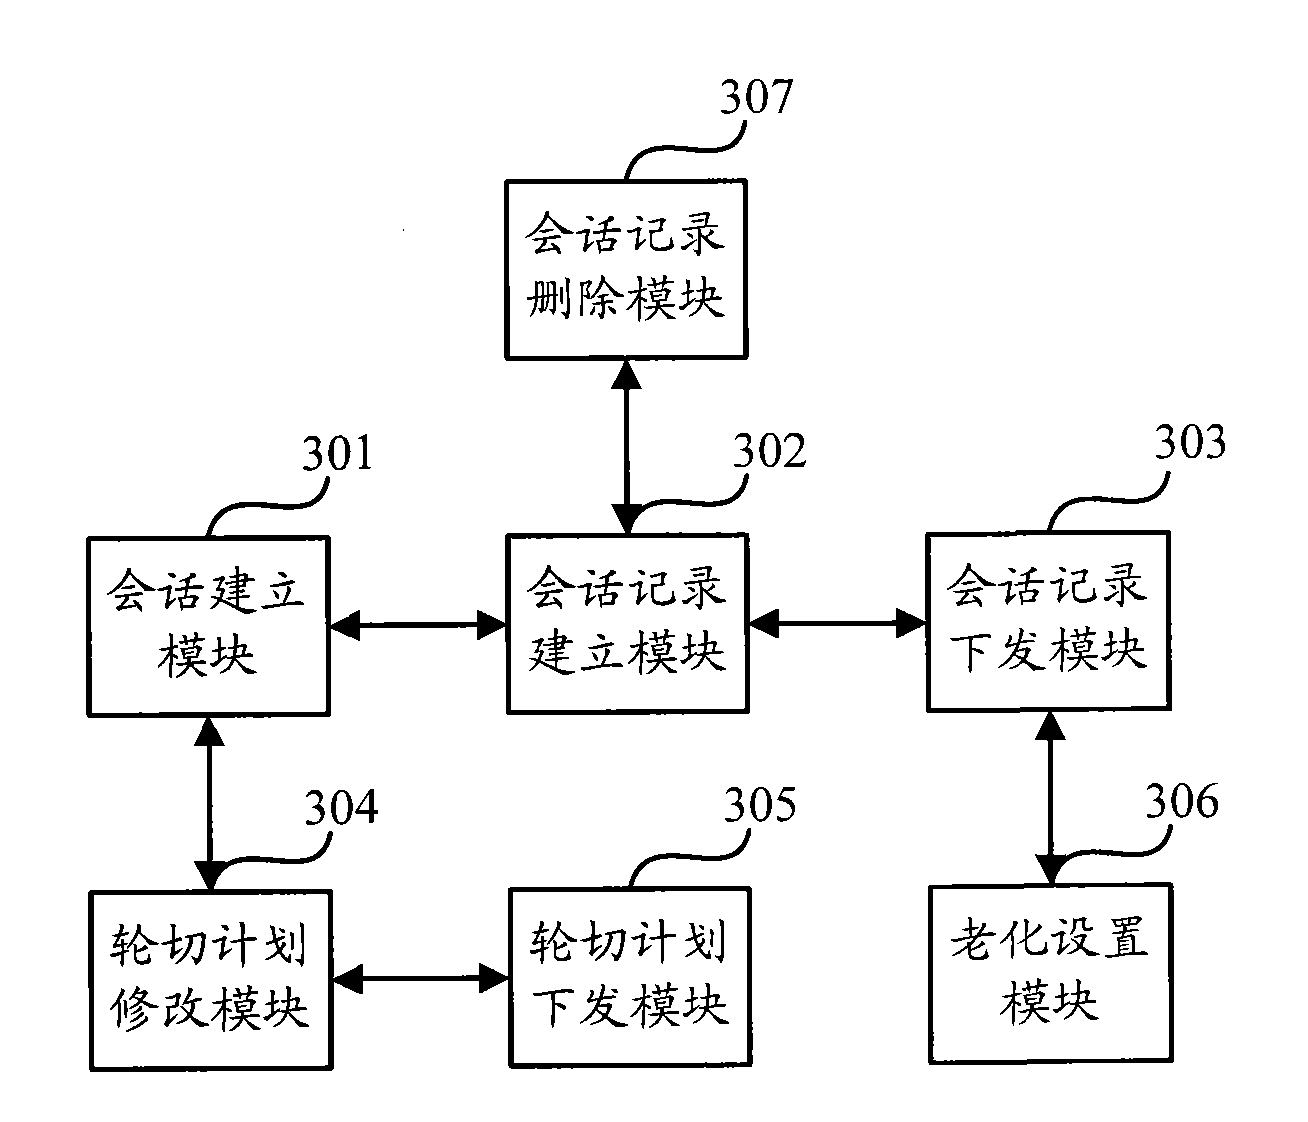 Method for processing signaling, and control server, decoder and encoder